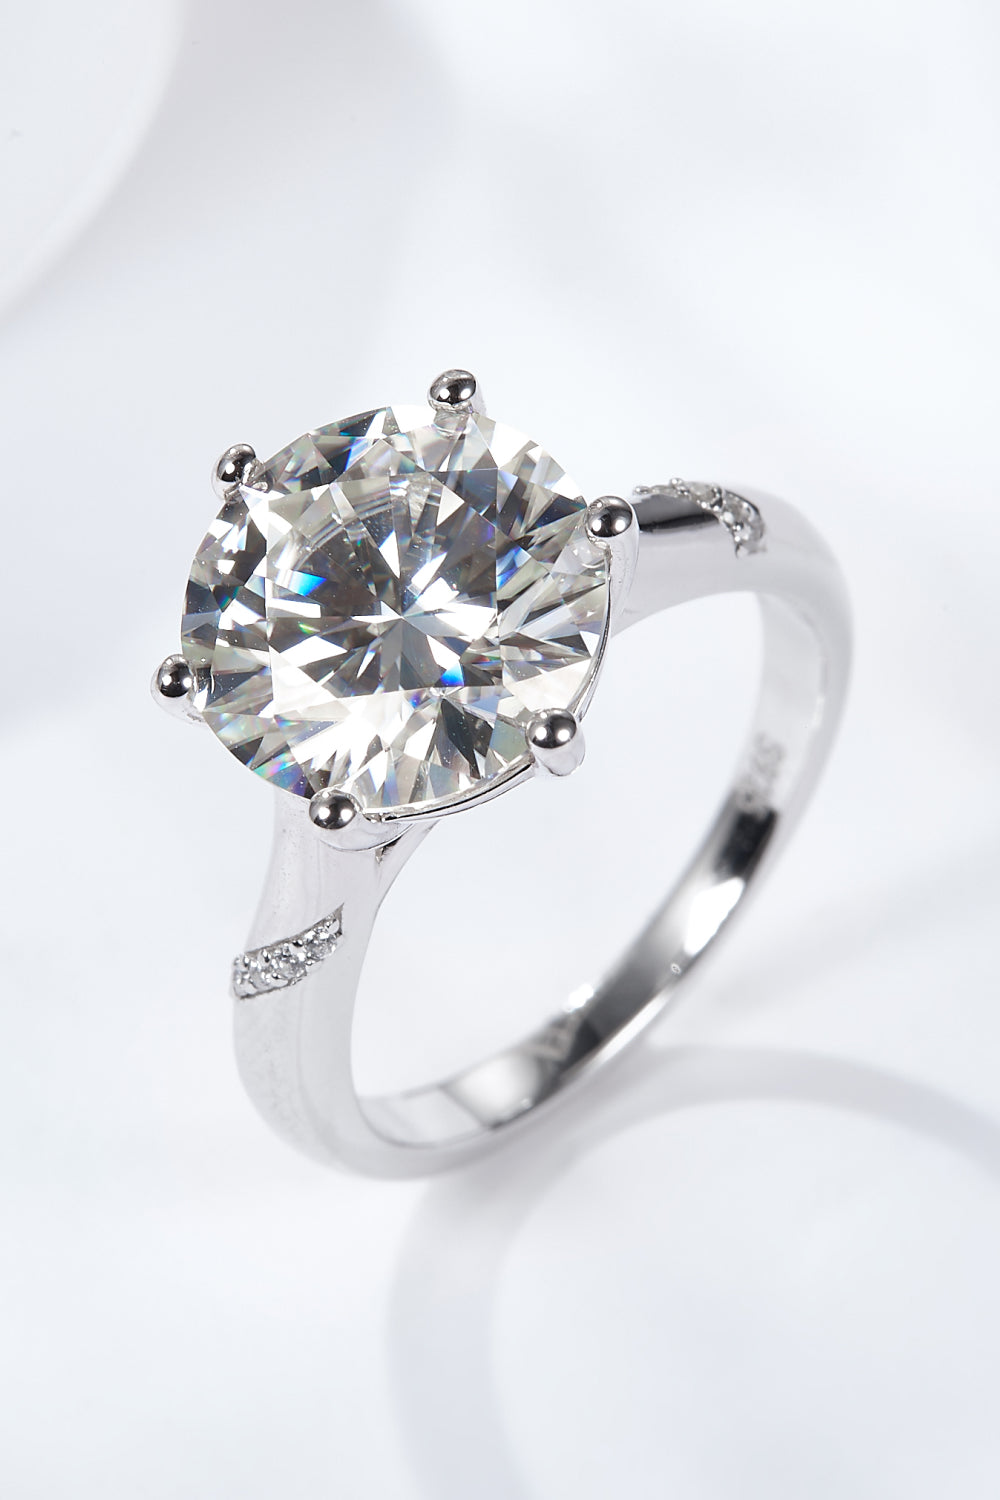 5 Carat  Moissanite Solitaire Ring Moissanite Jewelry Brides by Emilia Milan 